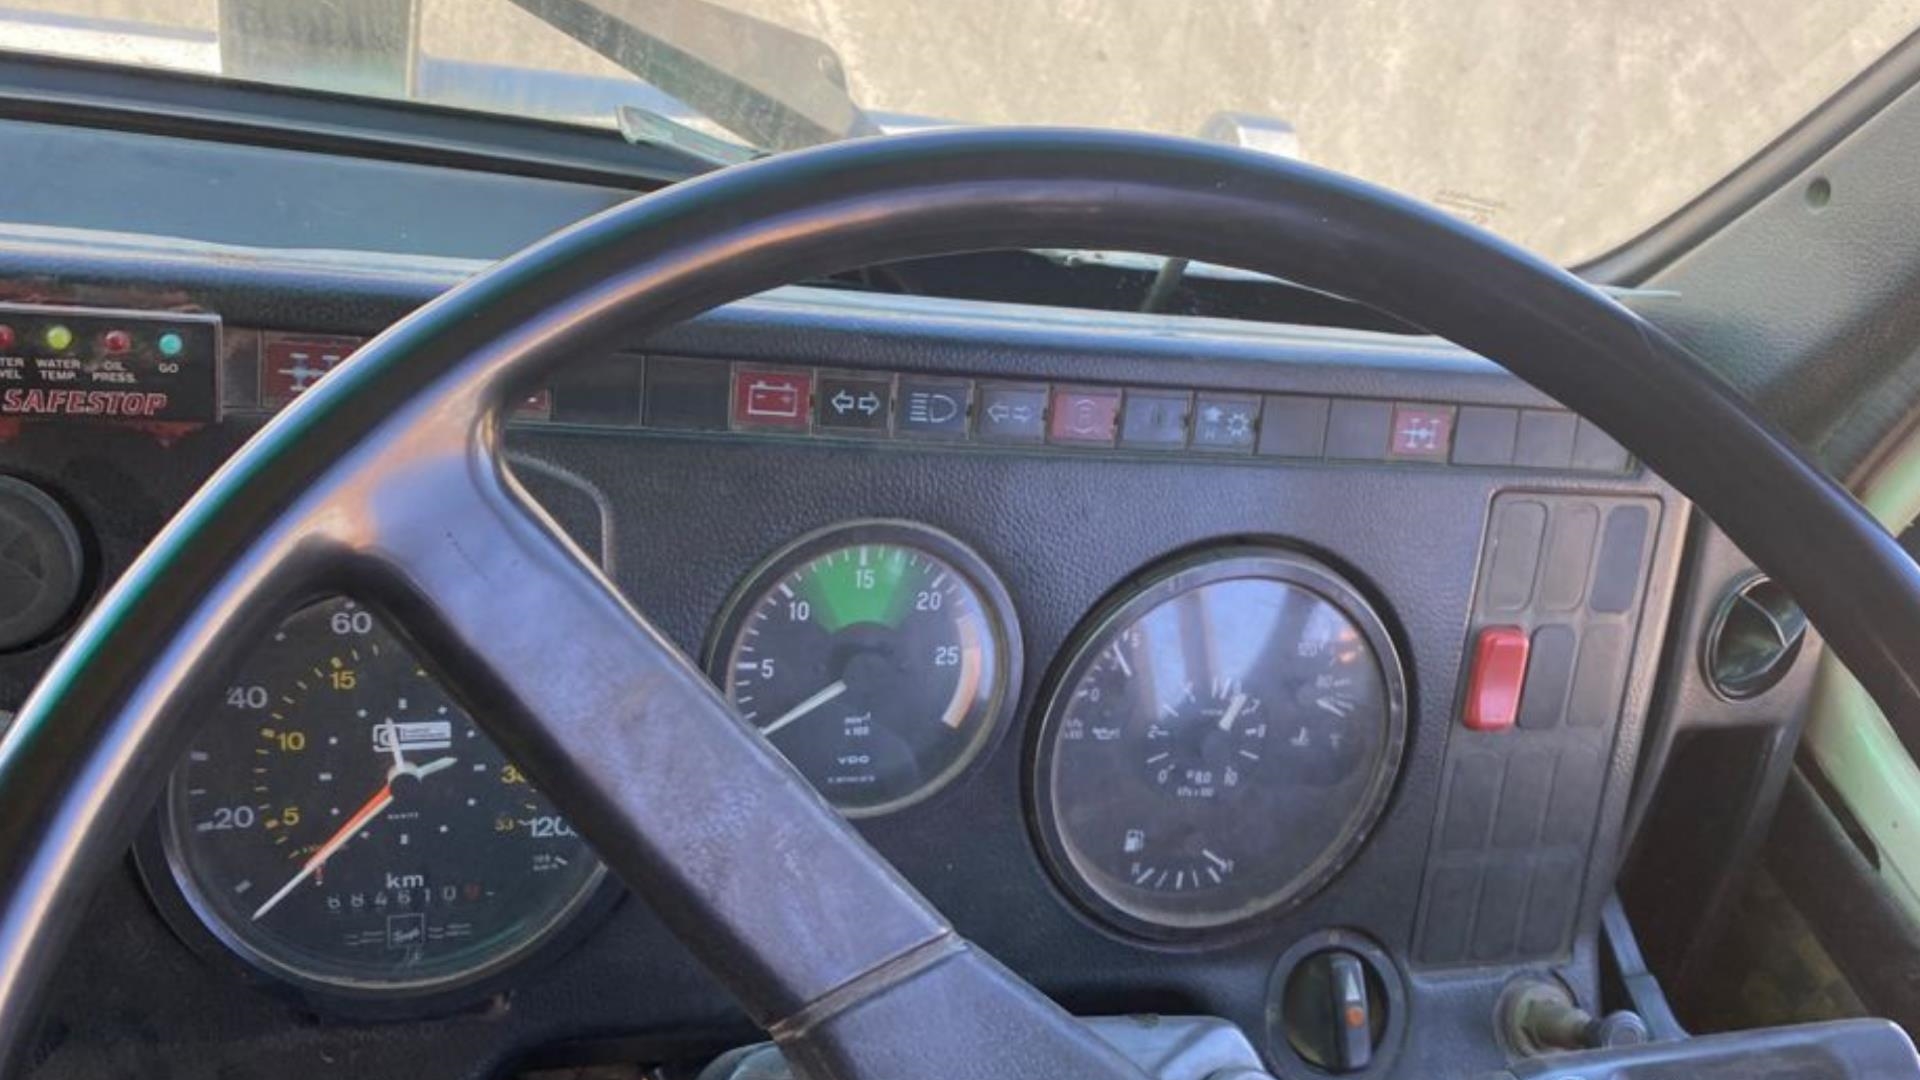 Mercedes Benz Truck tractors 1987 Mercedes Benz V Series 1987 for sale by Truck and Plant Connection | Truck & Trailer Marketplaces